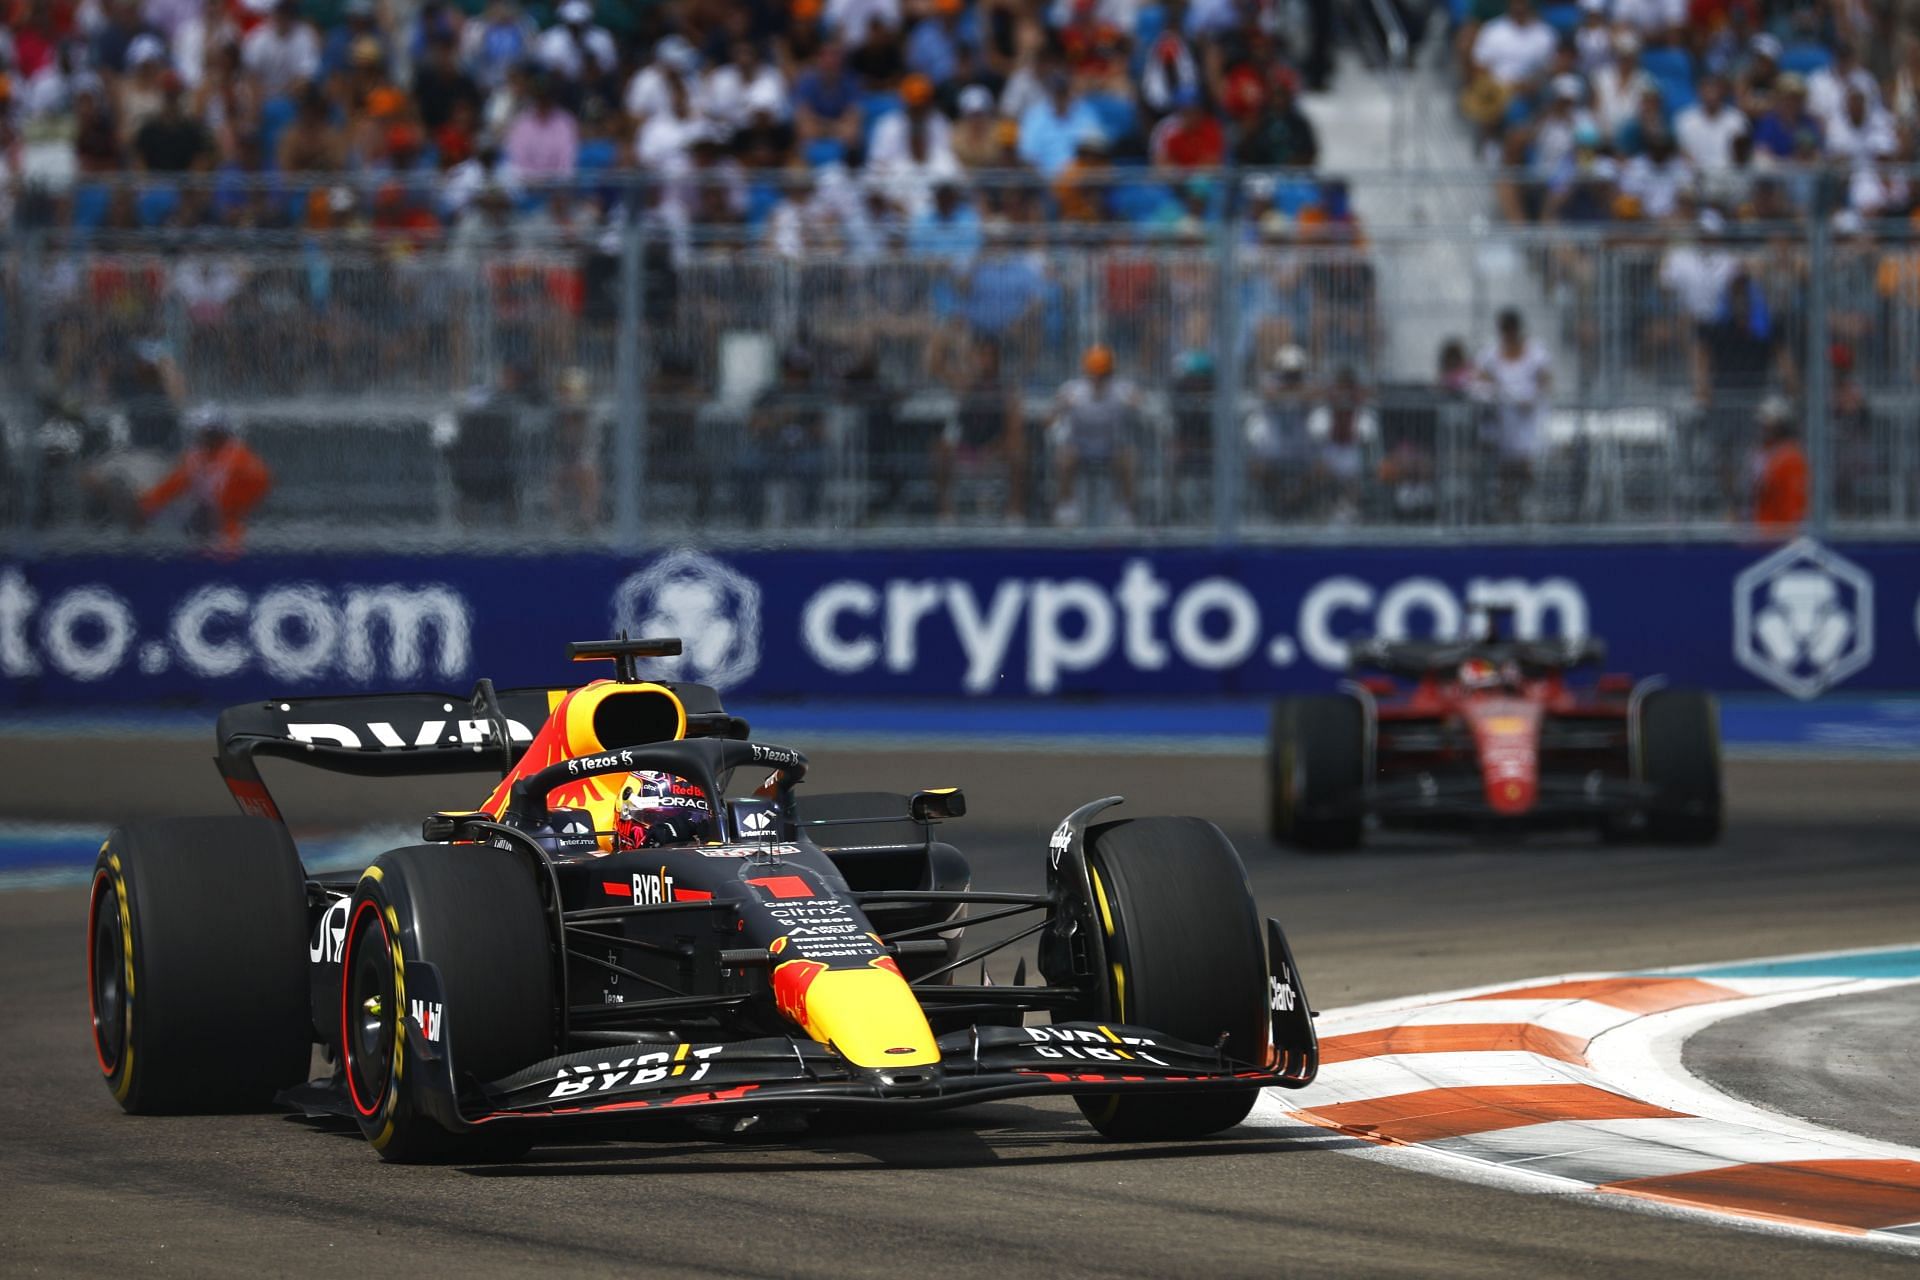 F1 Grand Prix of Miami - Max Verstappen leads Charles Leclerc during the race